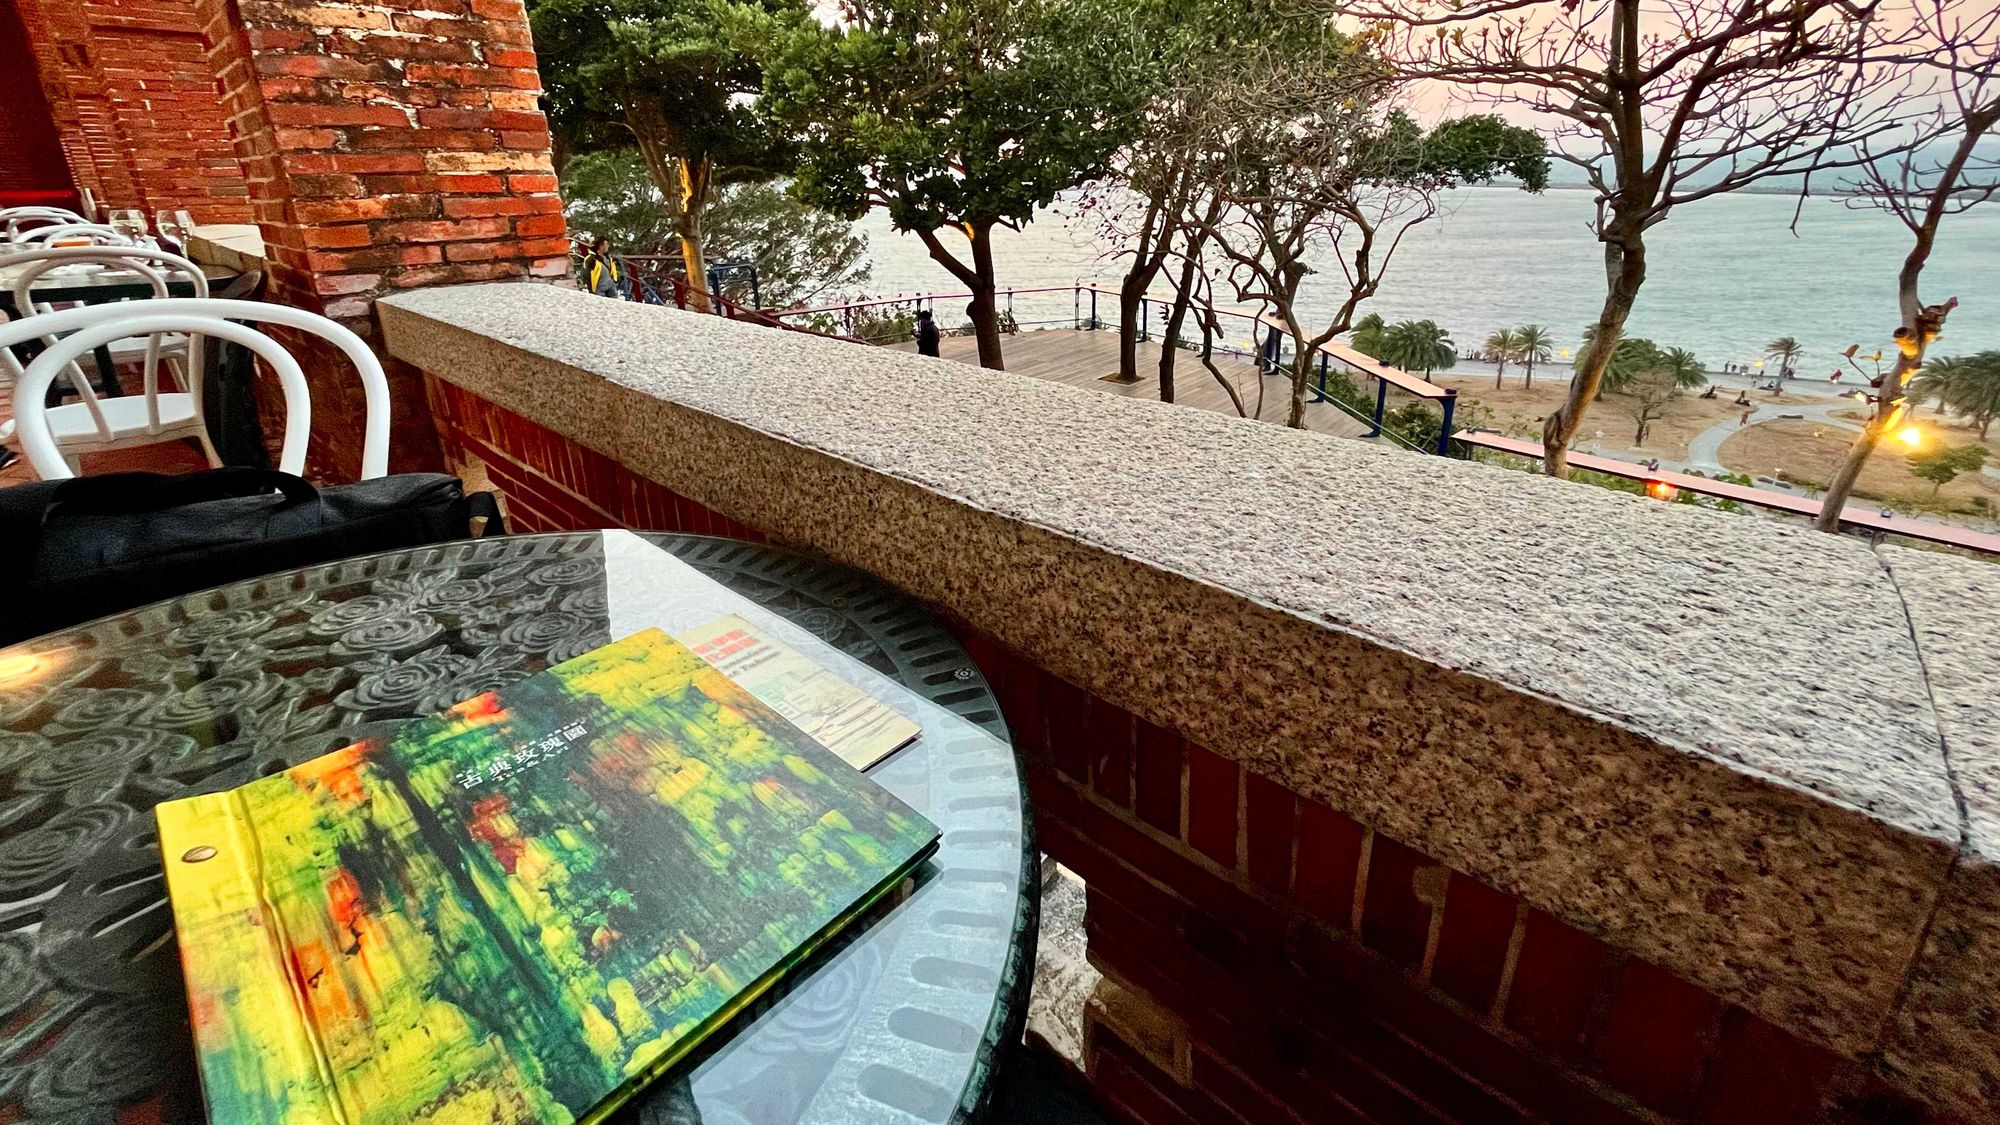 A book on a coffee table, with a view across the water below.